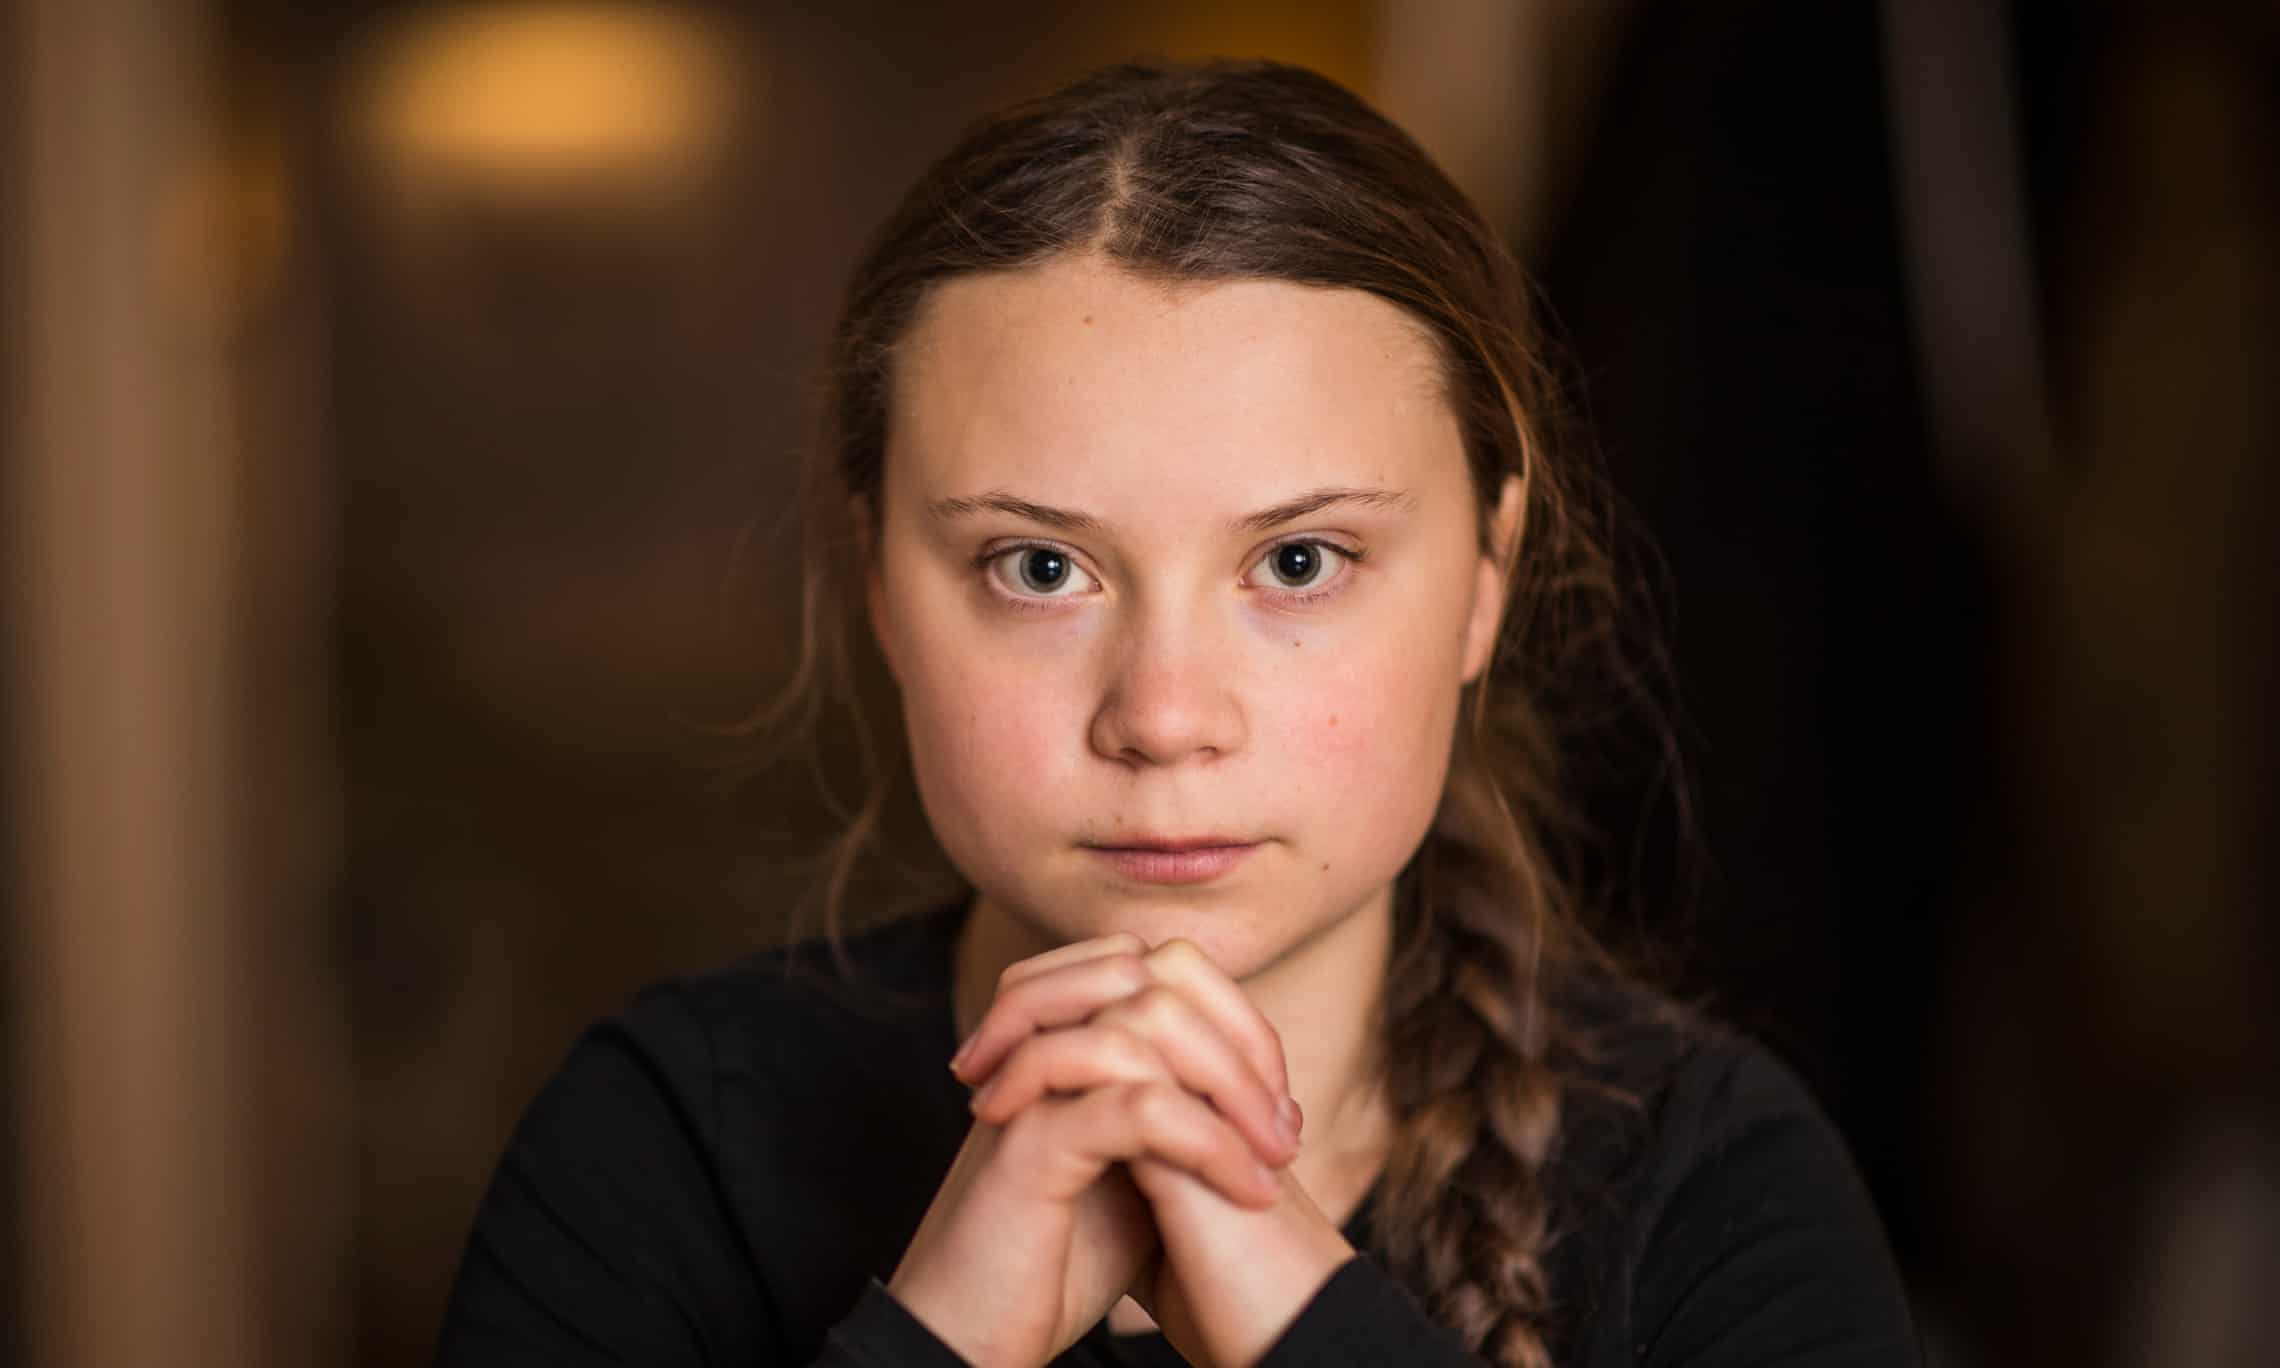 Greta Thunberg activist for climate change. a young voice for safeguarding nature in a world that is failing us